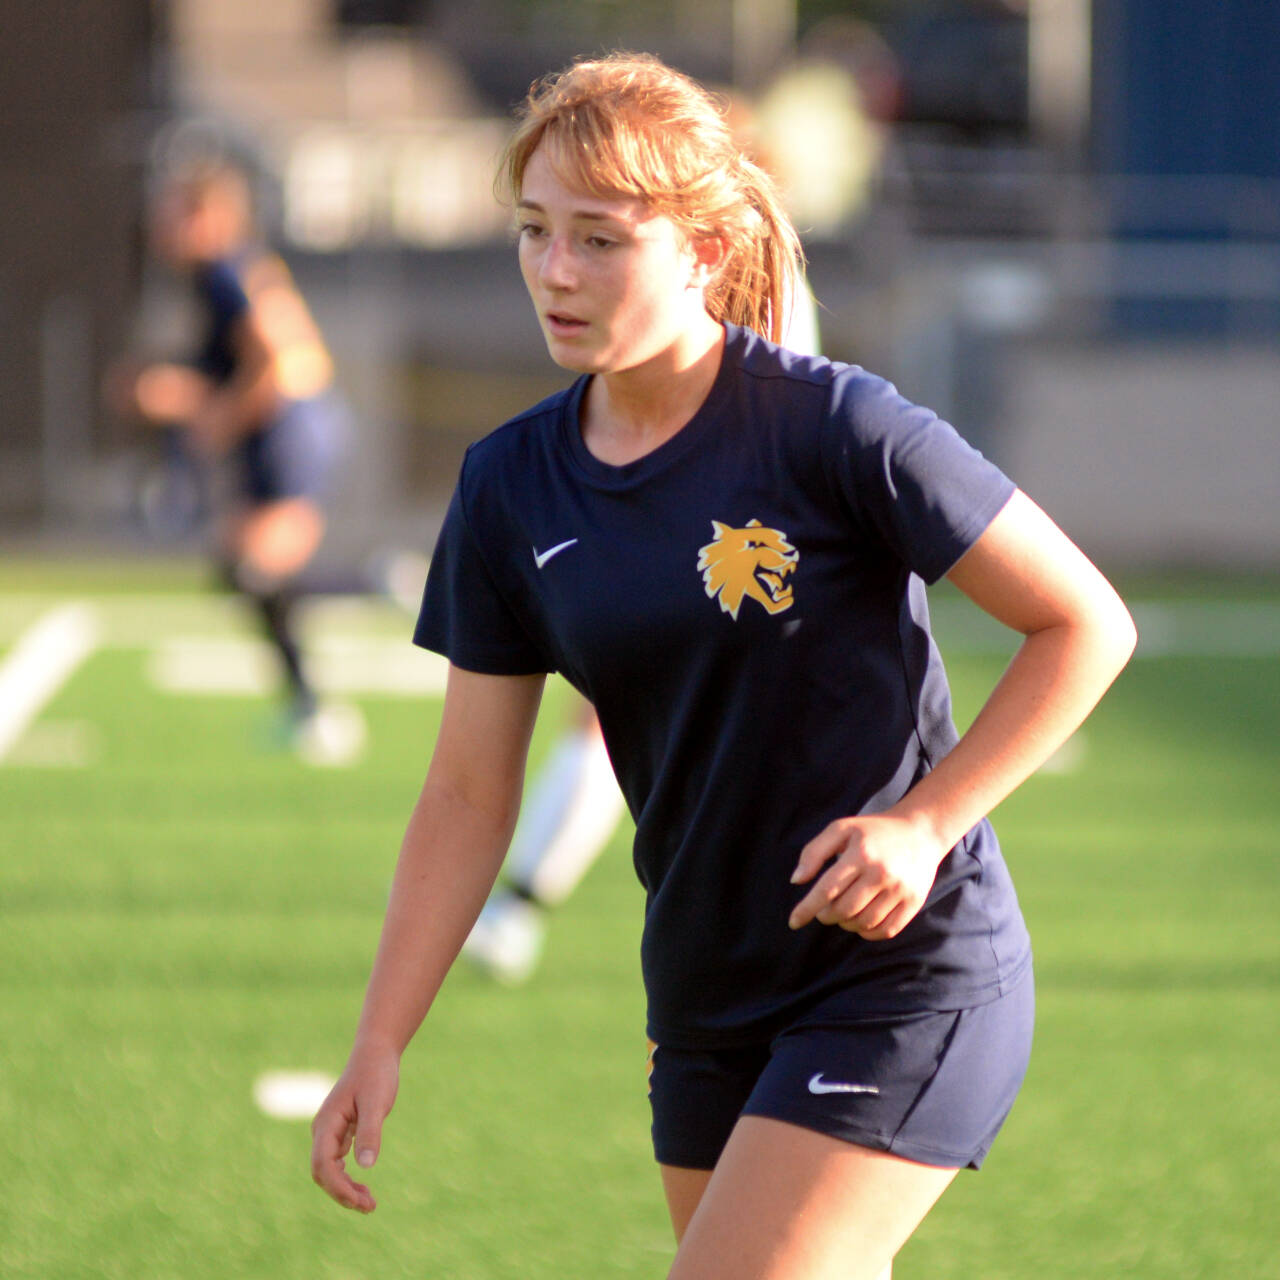 DAILY WORLD FILE PHOTO Aberdeen midfielder Zoe Troeh, seen here in a file photo, scored three goals in a 6-0 win over Hoquiam on Saturday at Olympic Stadium in Hoquiam.